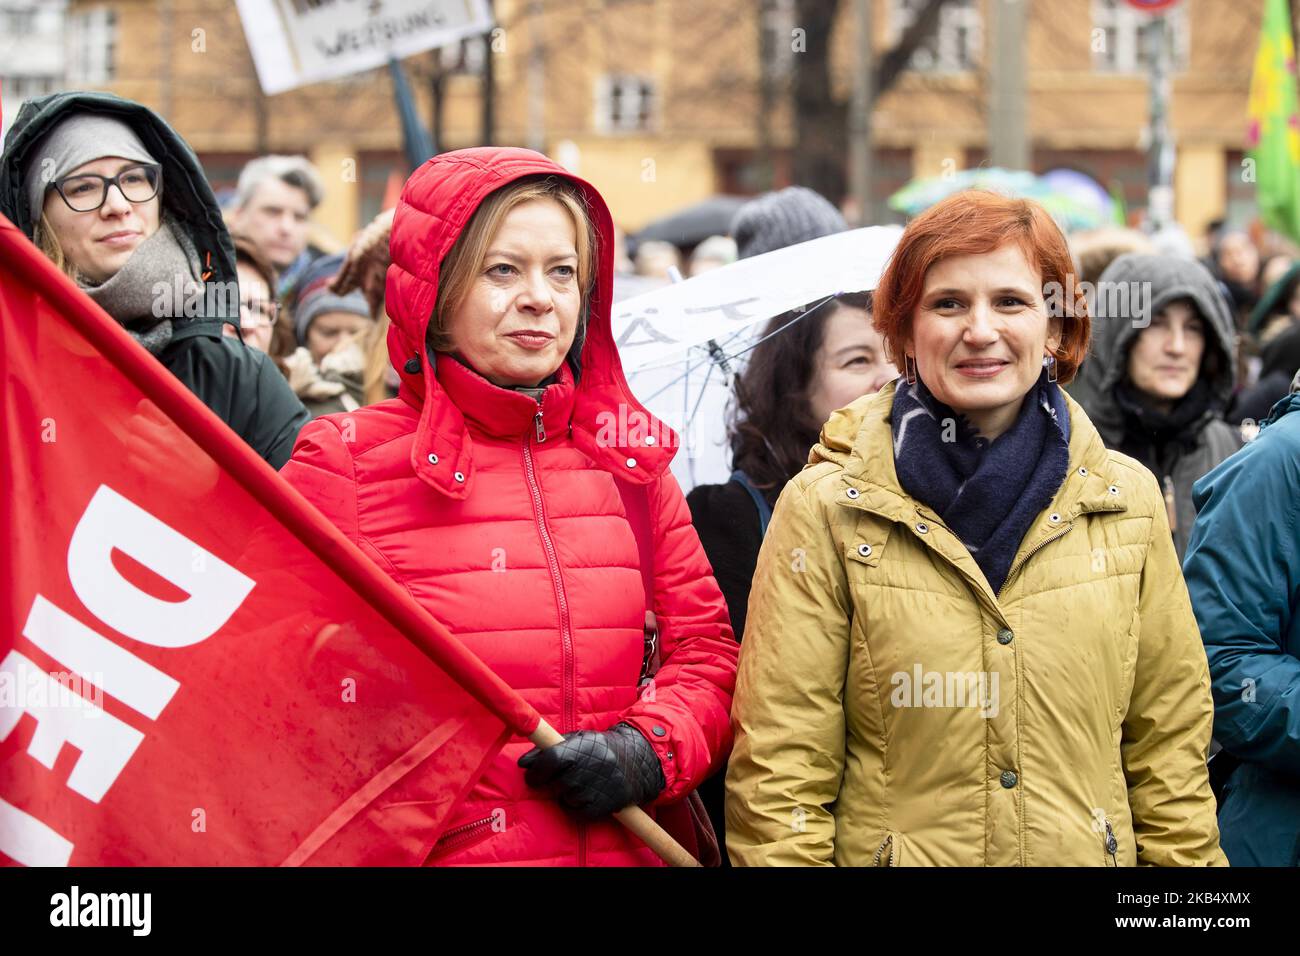 Members of Parliament (Die Linke) Gesine Loetzsch (C-L)and Katja Kipping (C-R) attend a demonstration against law paragraph 219a and in favour of information and self-determination regarding abortion at Rosa-Luxembourg-Platz in Berlin, Germany on January 26, 2019. This article of law prohibits every kind of advertisement of abortion services in Germany. (Photo by Emmanuele Contini/NurPhoto) Stock Photo